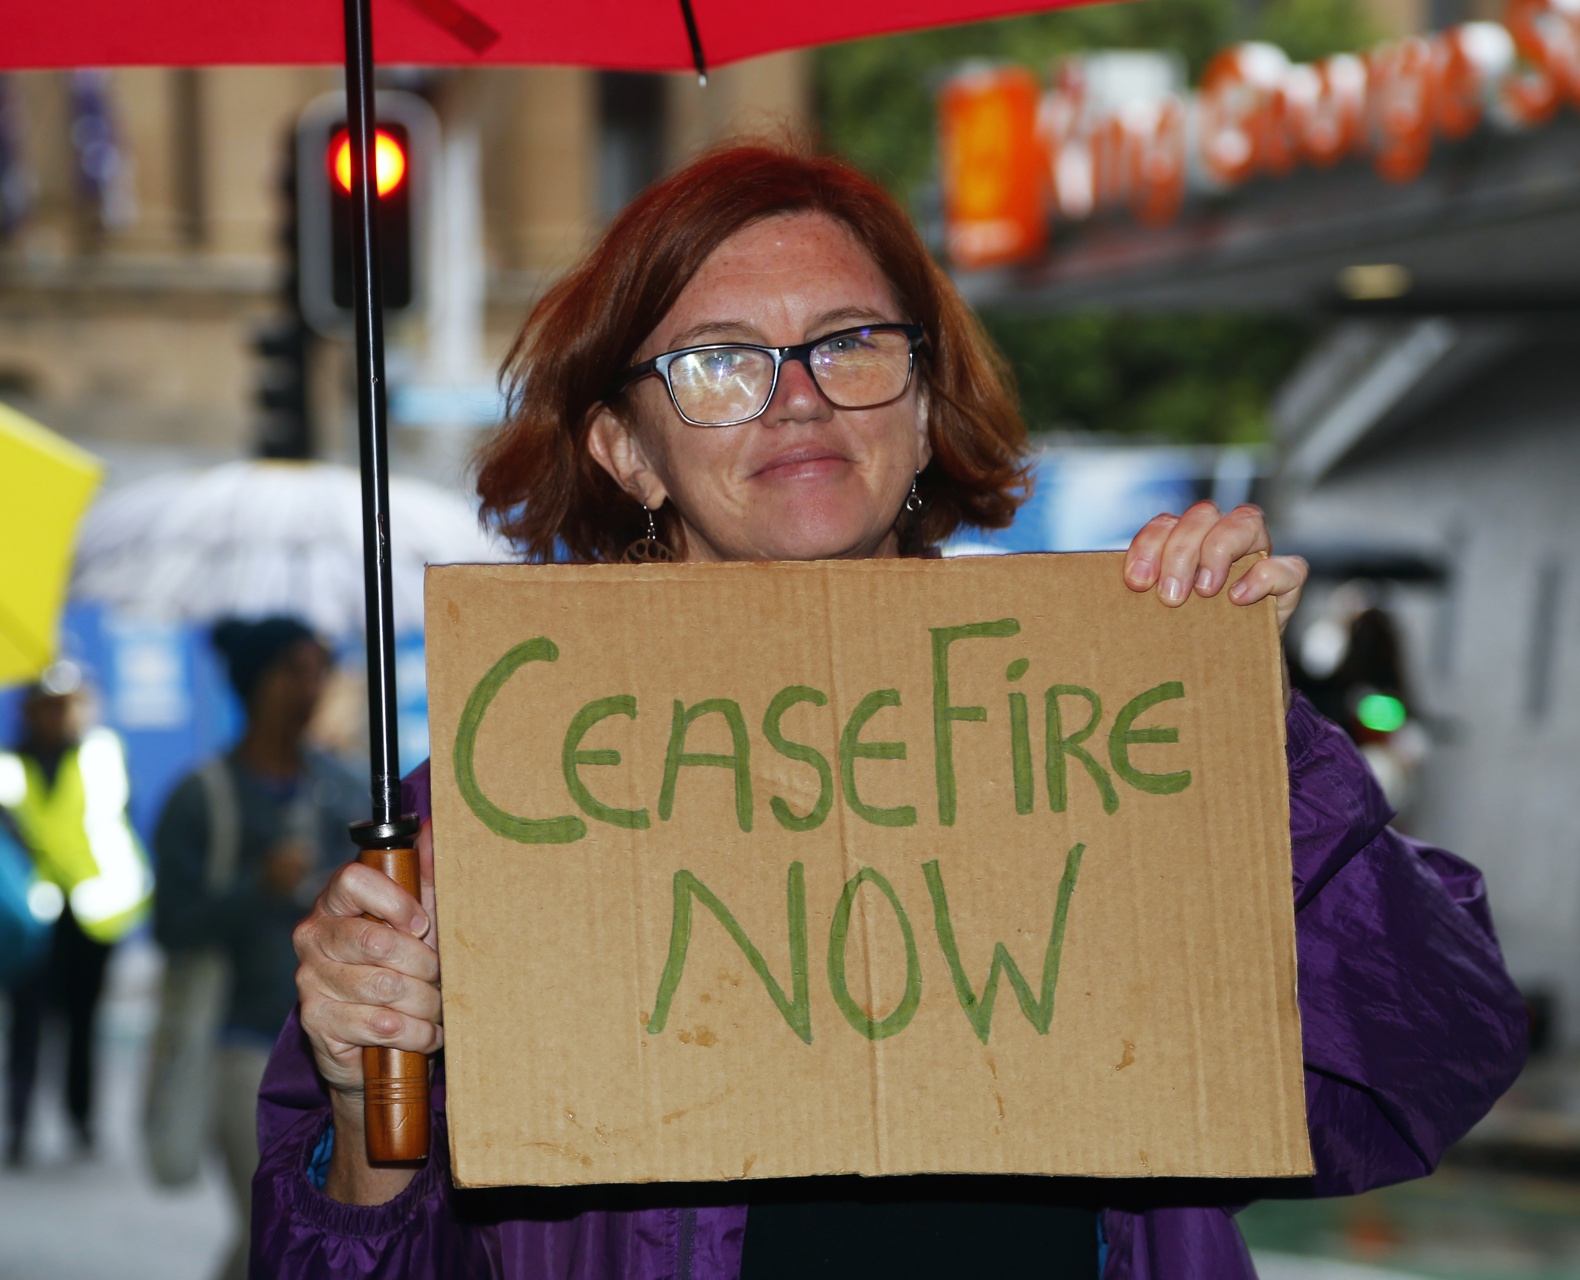 Ceasefire now, Meanjin/Brisbane, March 24